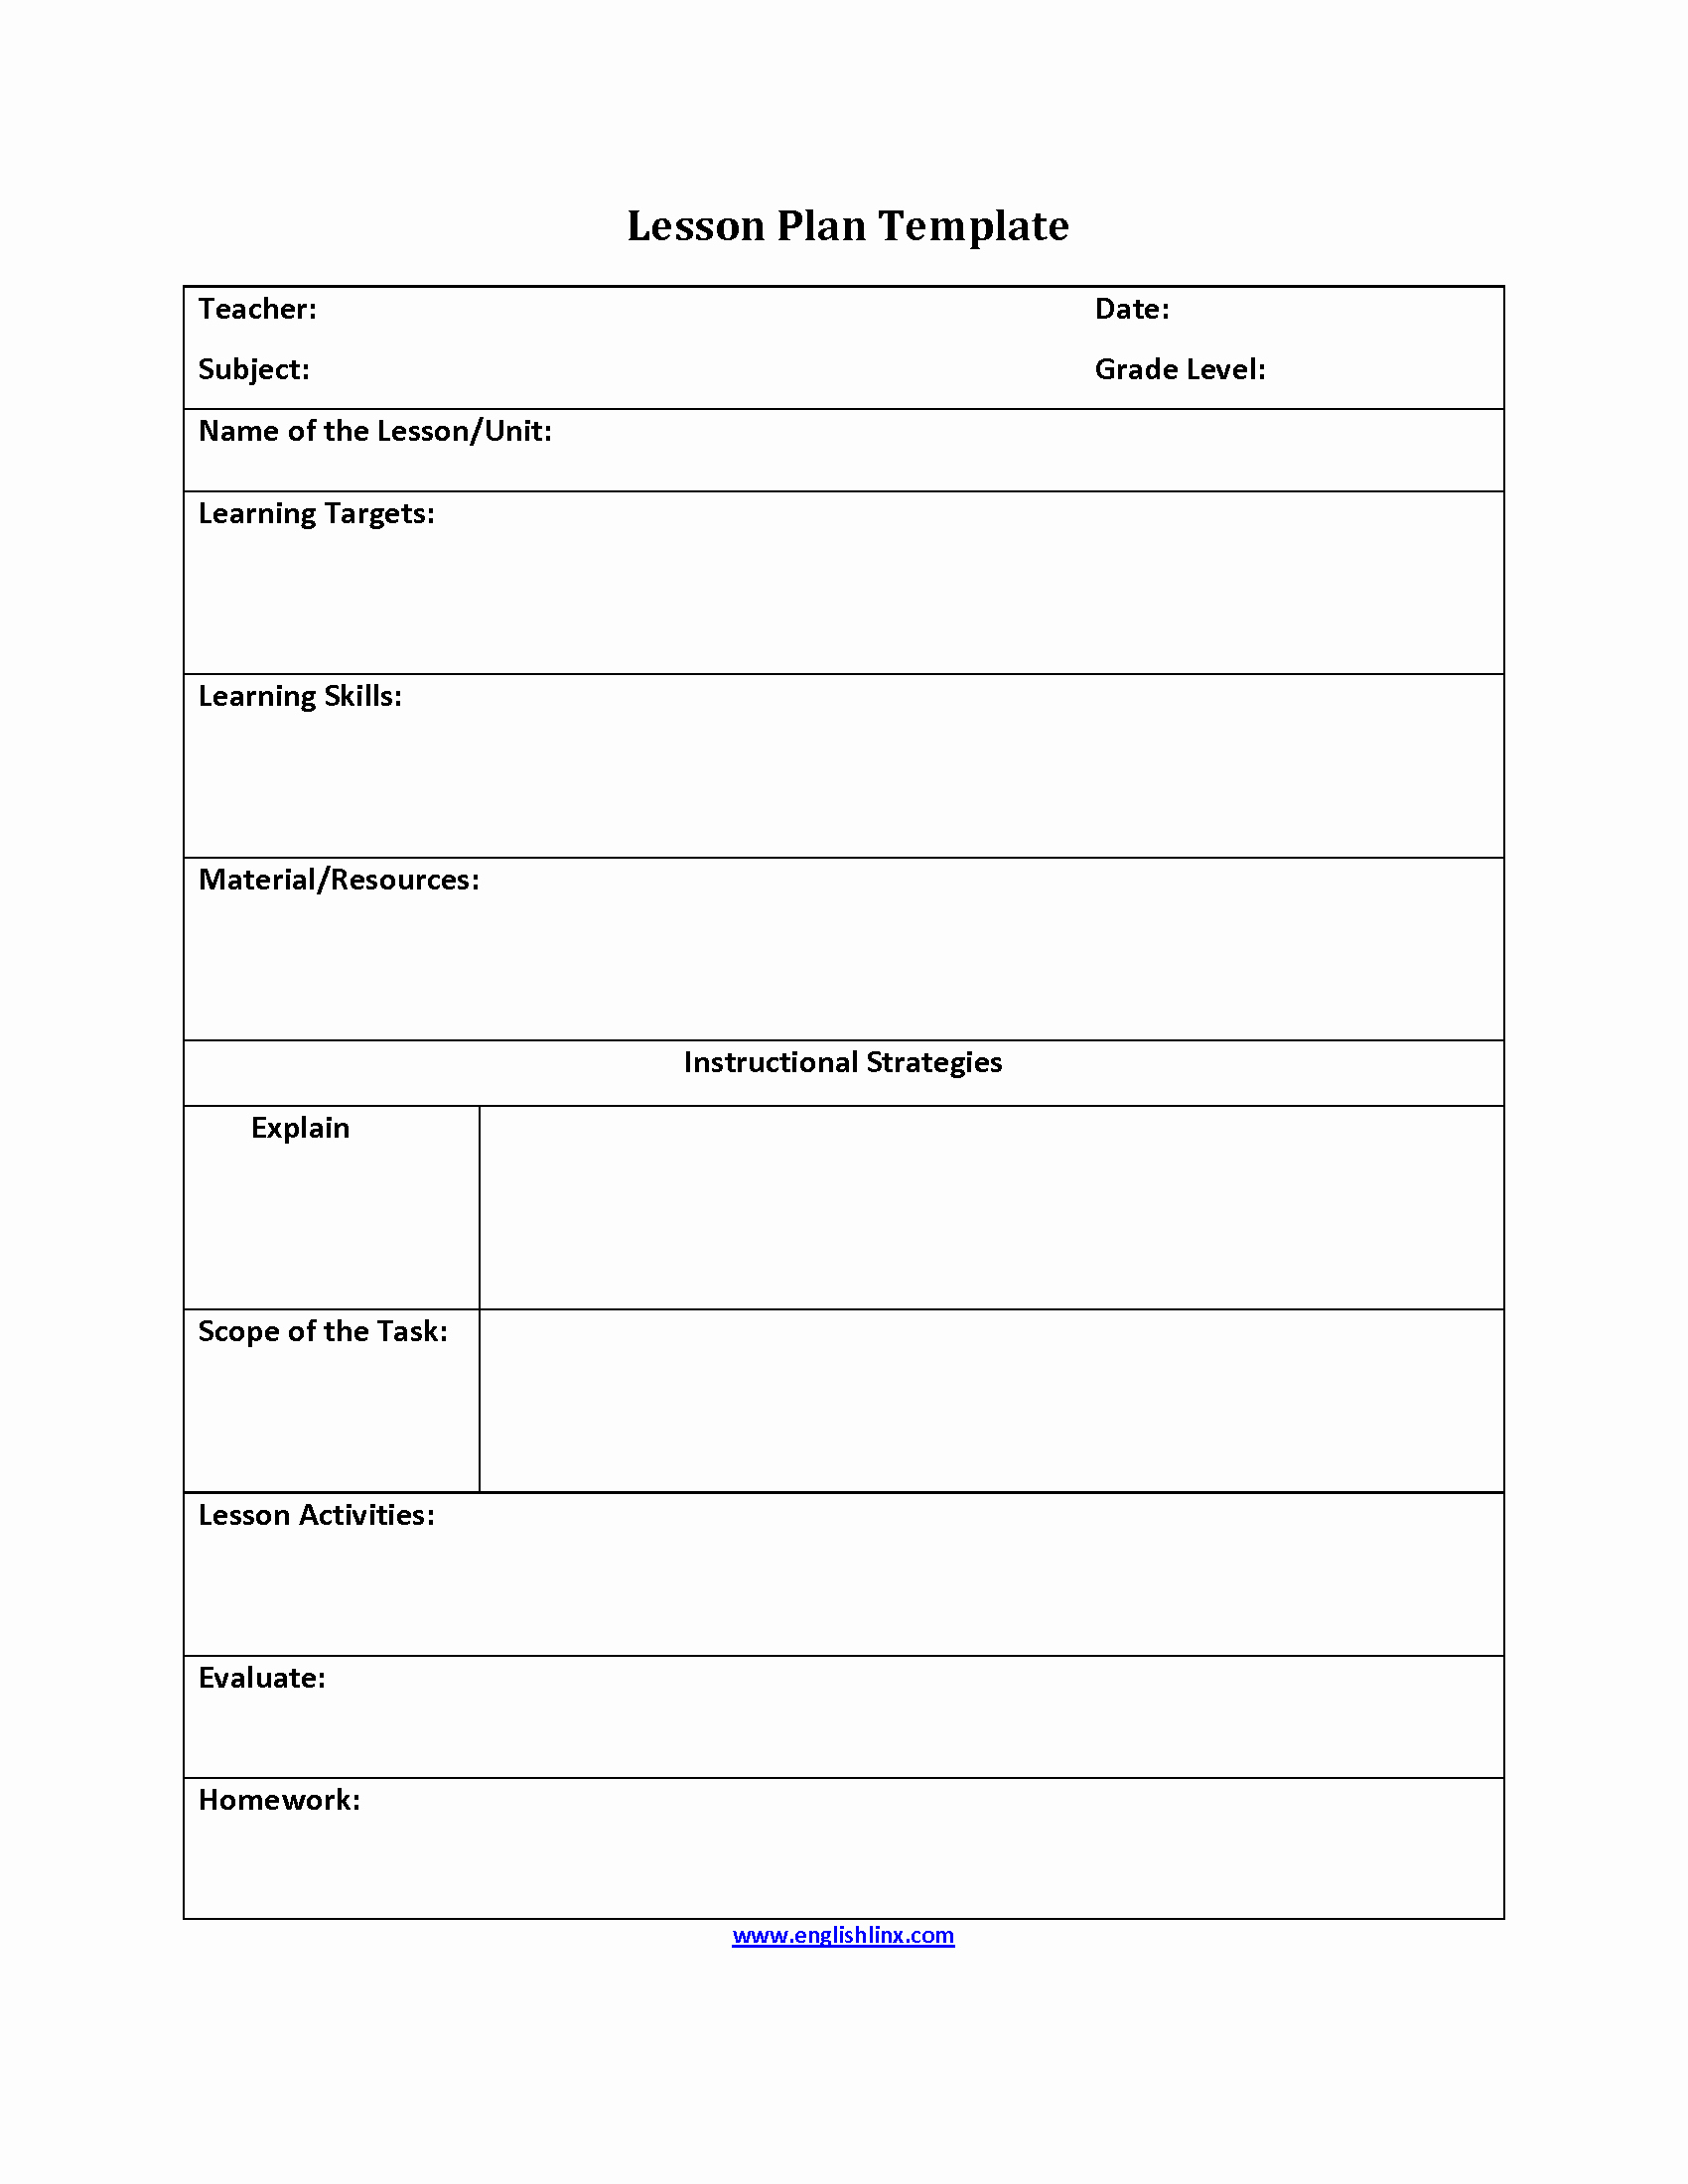 Pe Lesson Plan Template Blank Awesome Instructional Strategies Lesson Plan Template